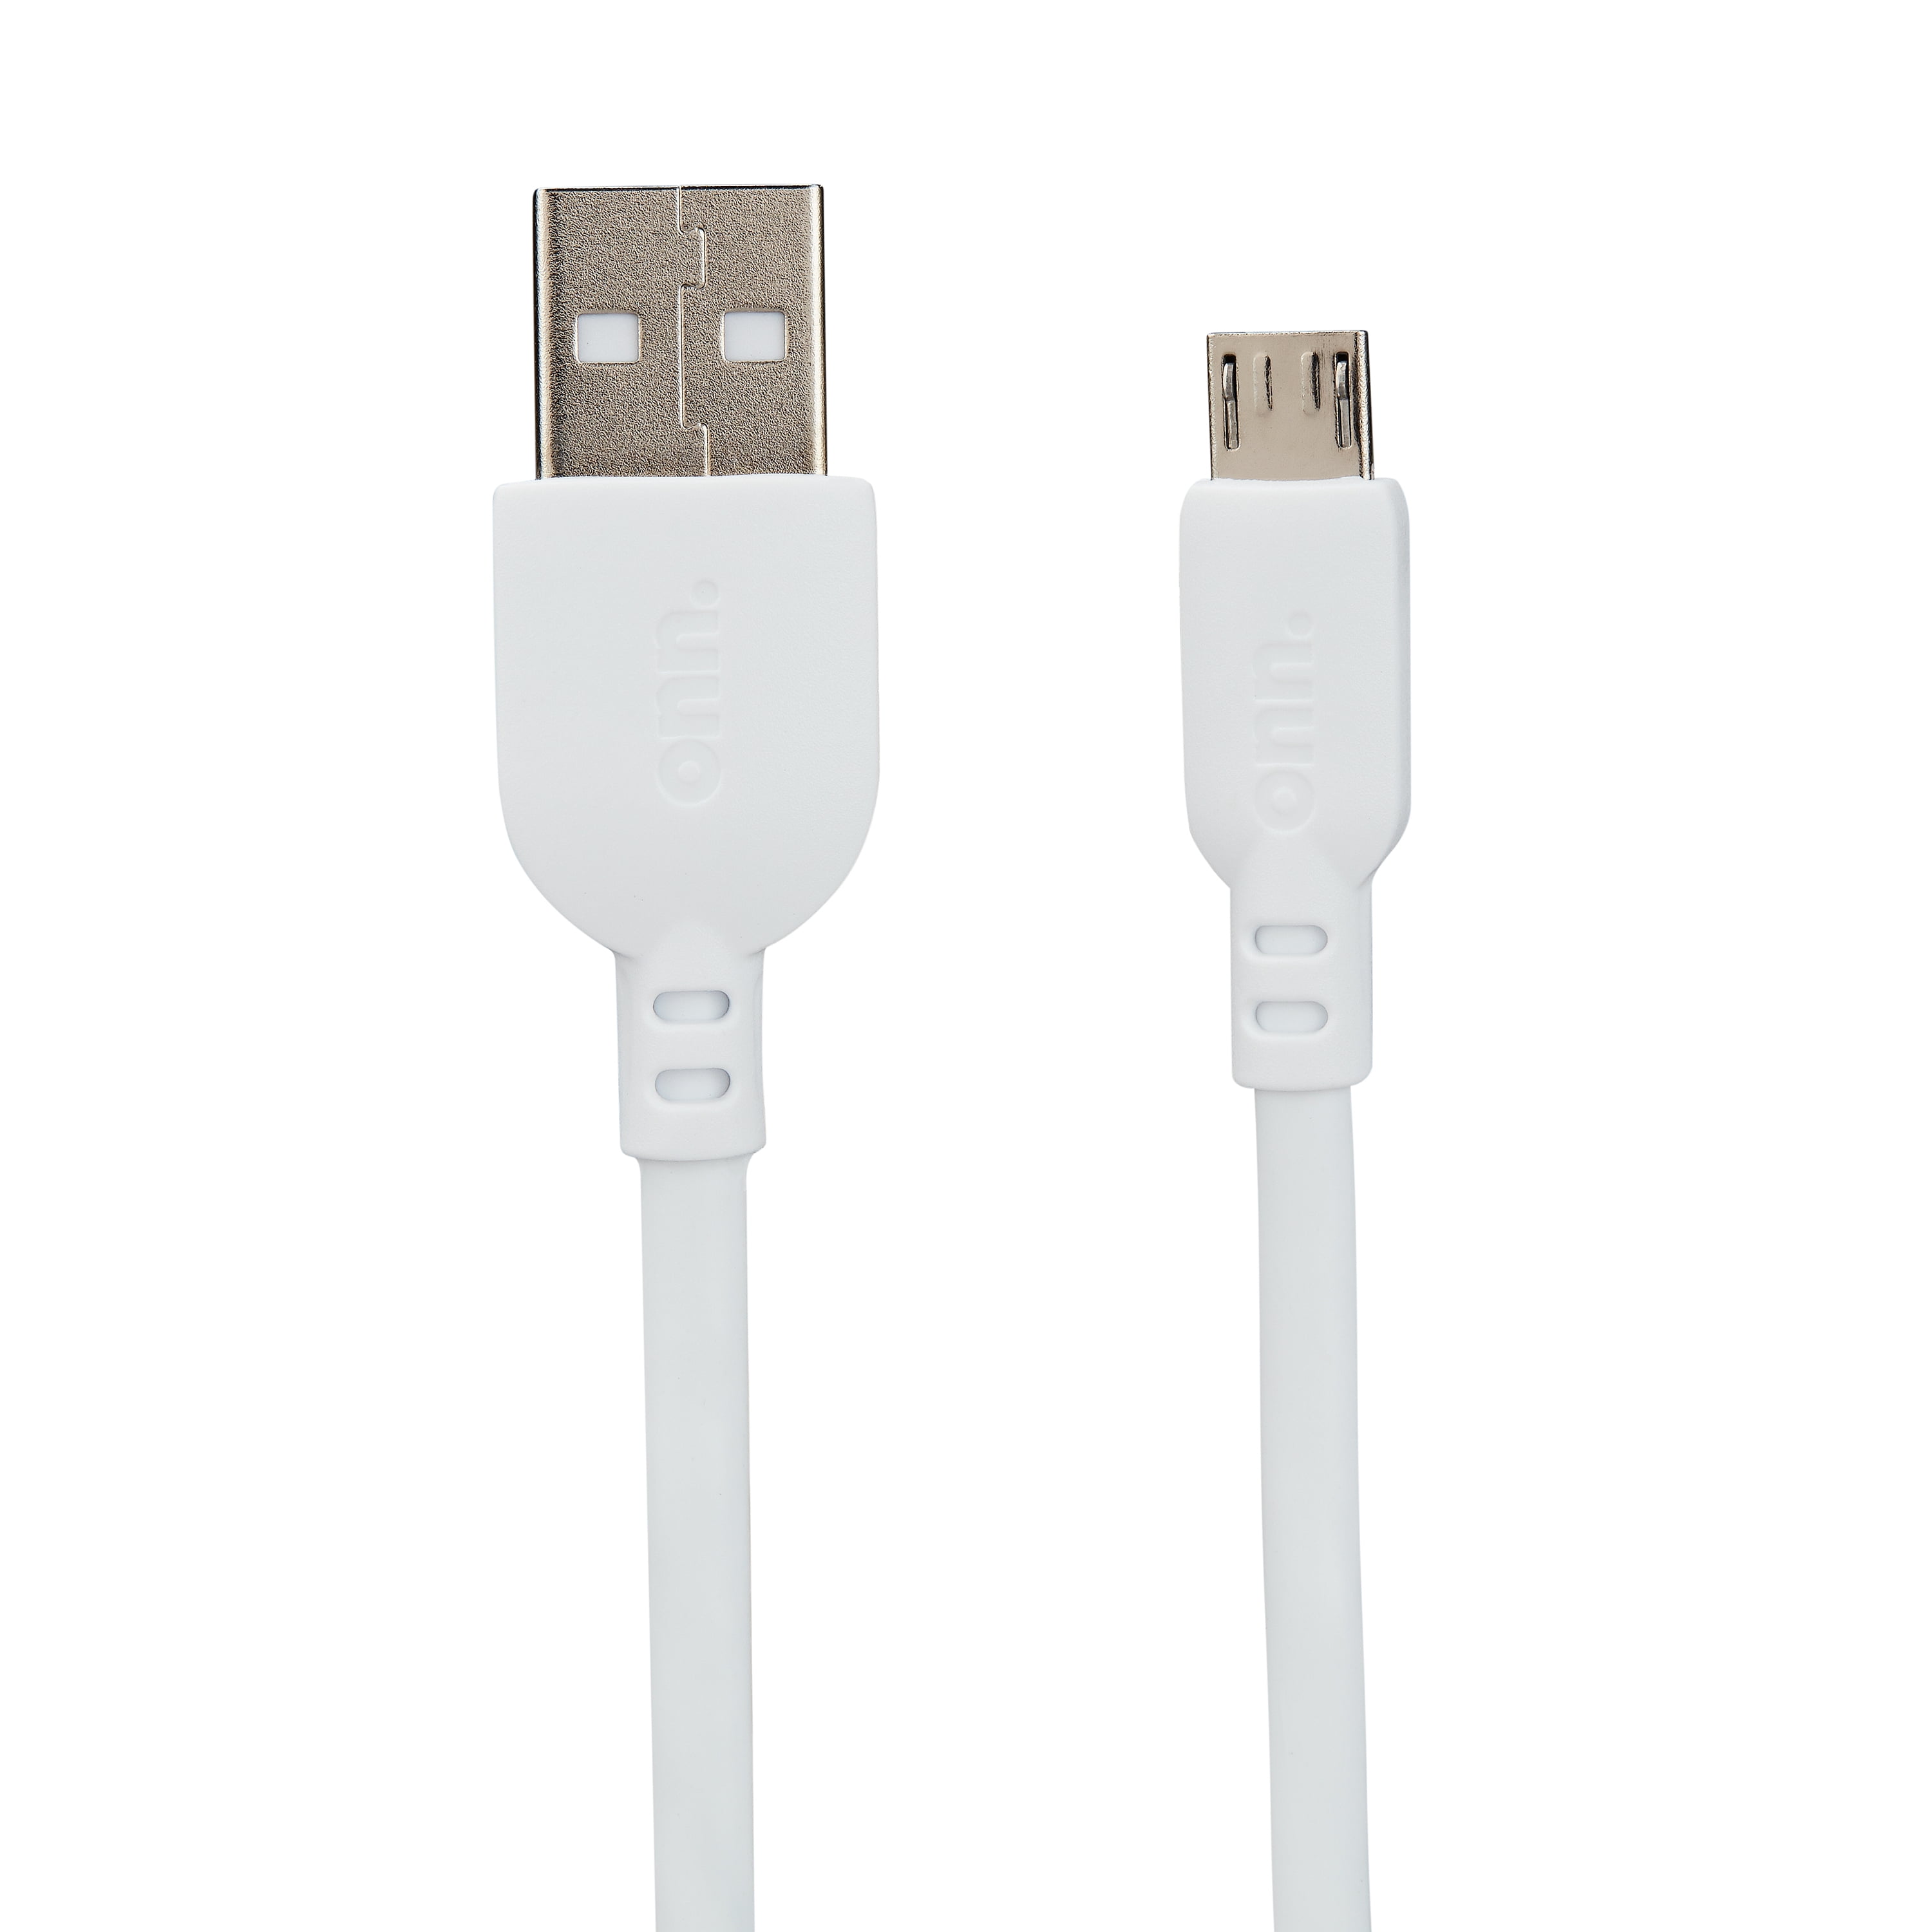 onn. Micro-USB to USB Cable, 10 ft, White